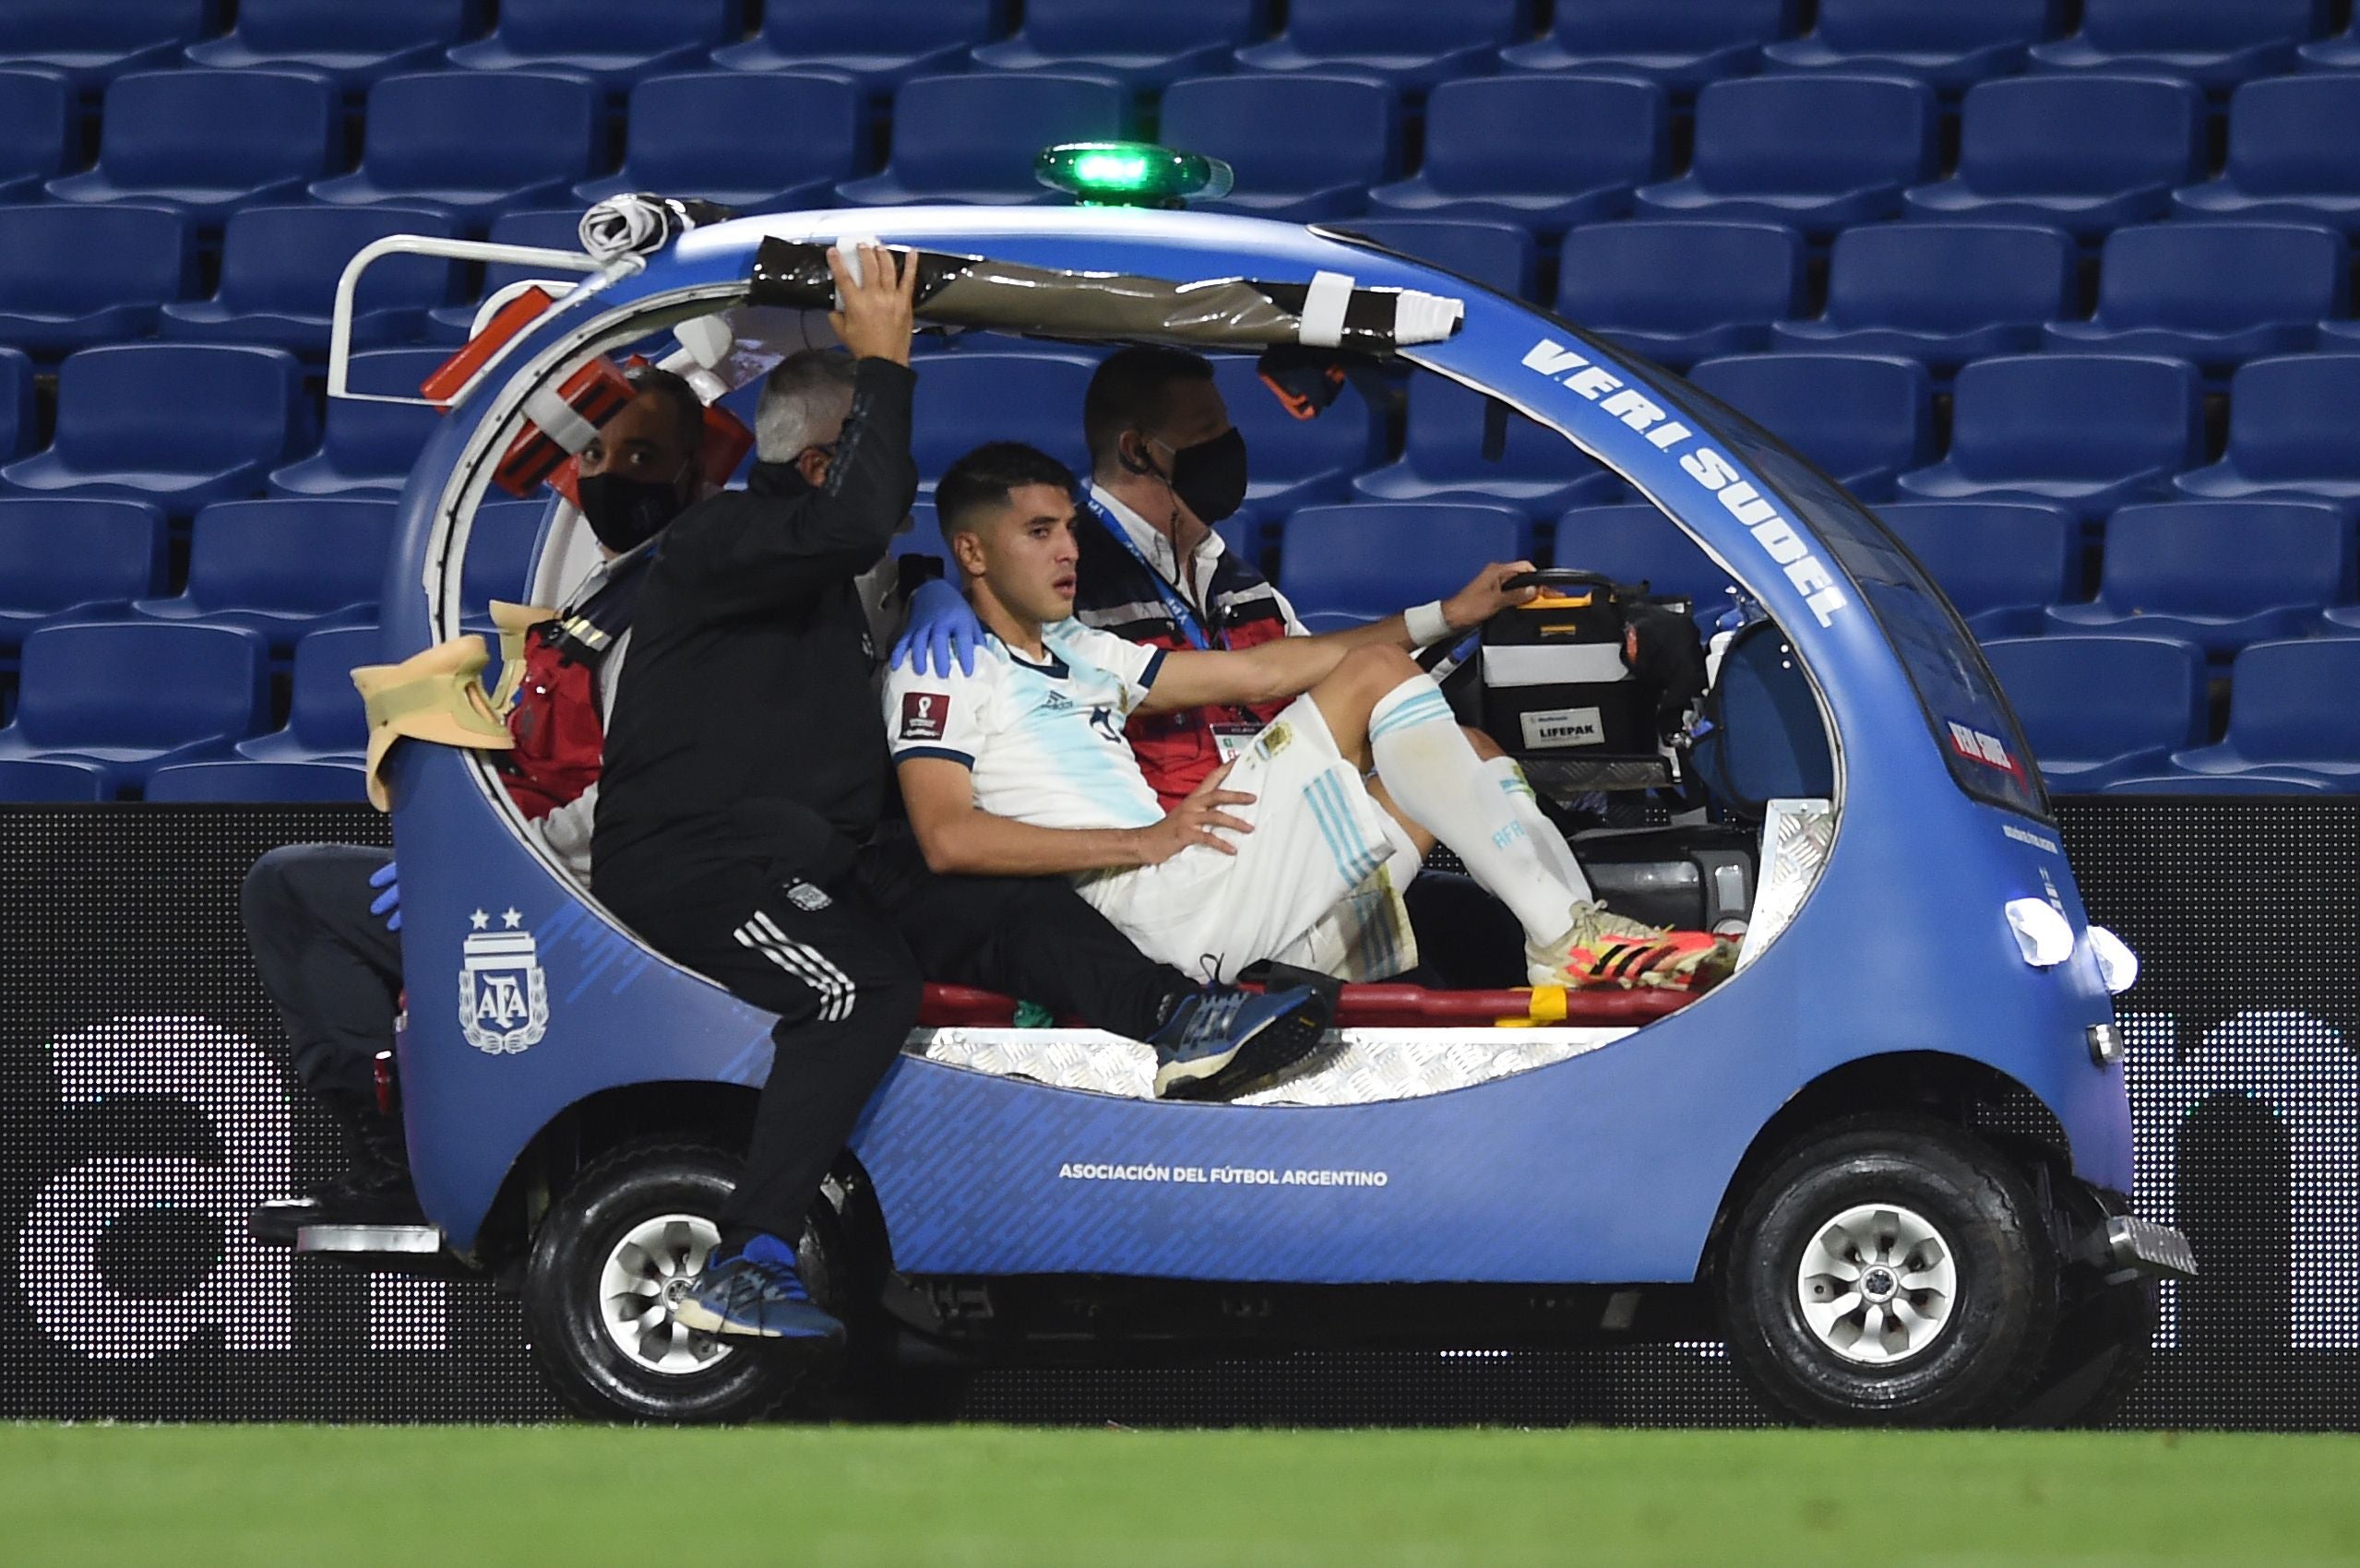 Argentina’s Exequiel Palacios is taken out of the field in a cart after getting injured during the closed-door 2022 FIFA World Cup South American qualifier football match against Paraguay at La Bombonera Stadium in Buenos Aires on November 12, 2020.